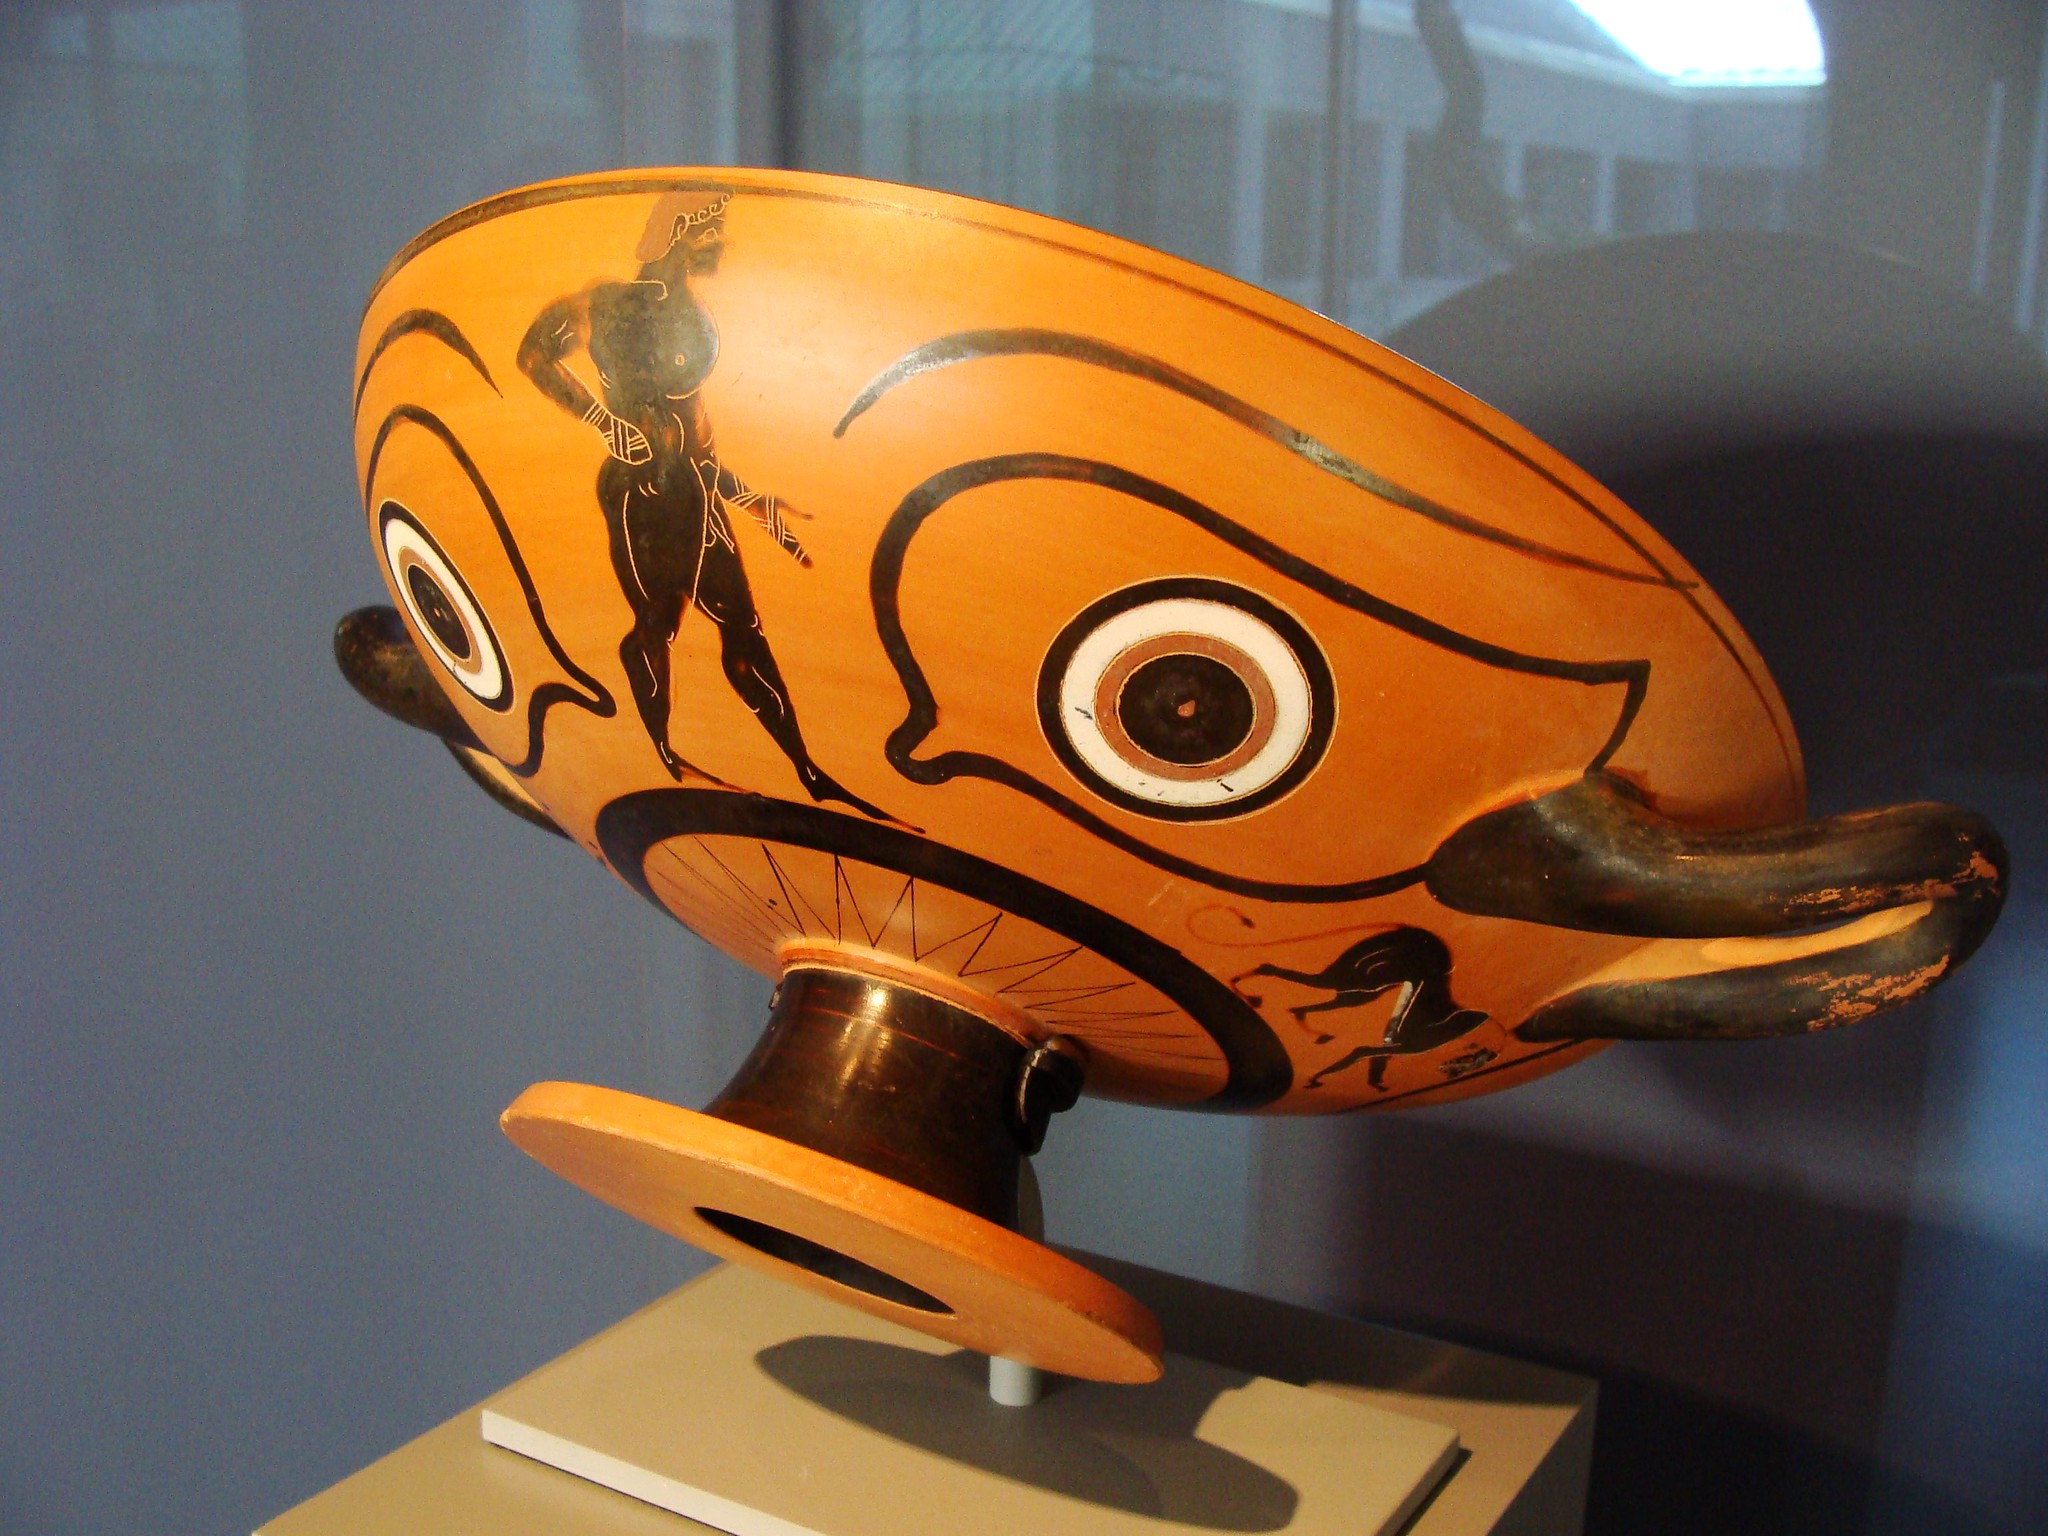 Workshop of Nikosthenes, Kylix, Athens, Greece, 530/520 BCE. Art Institute of Chicago. Photo: Lucas Livingston, CC BY 2.0